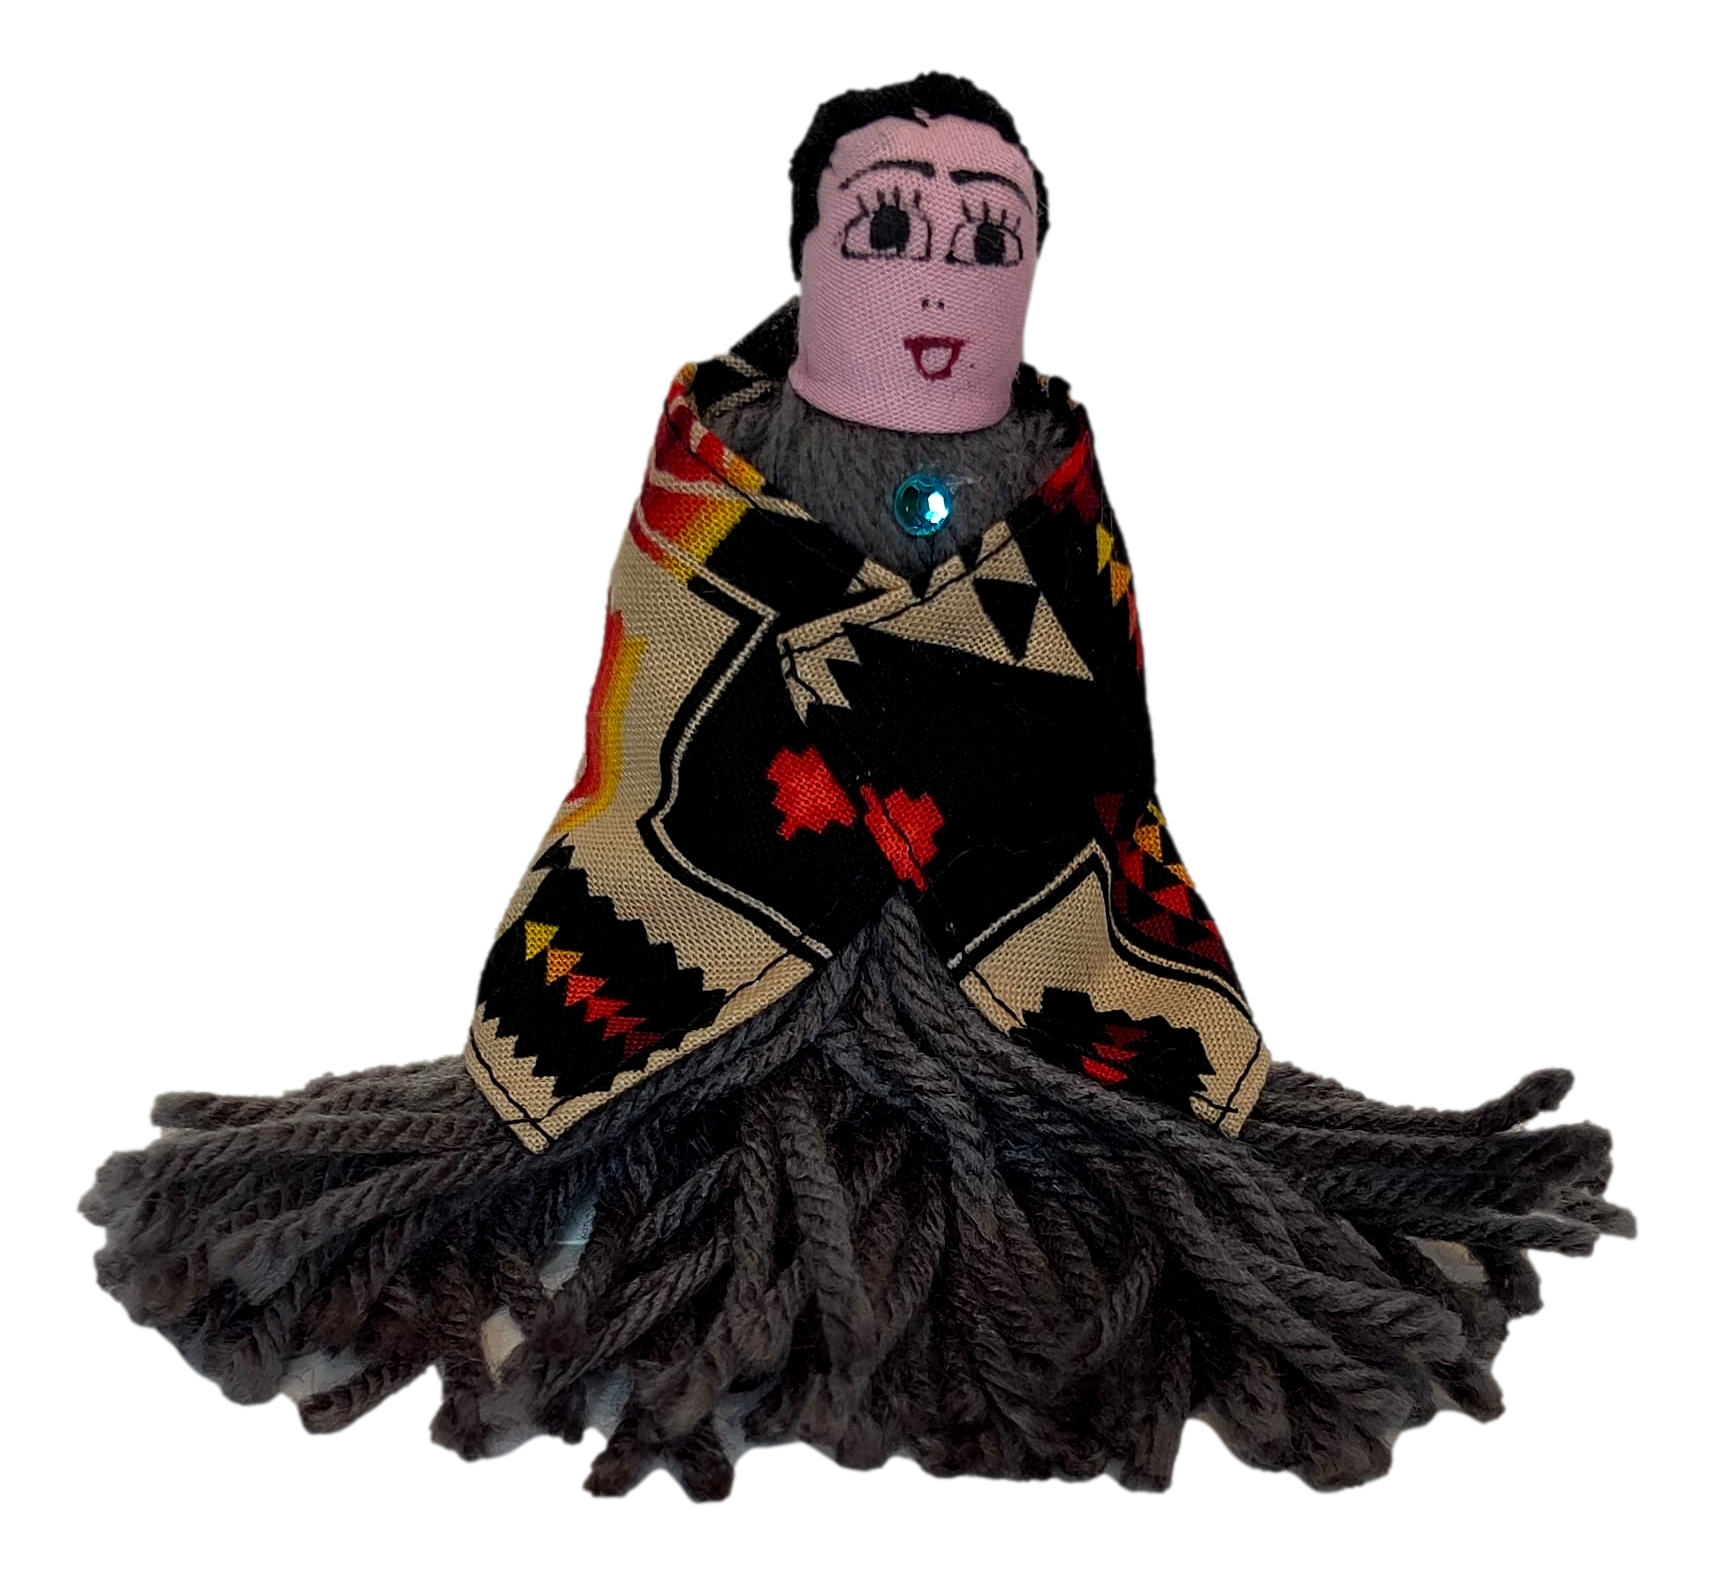 Toy Traditional Native American Dolls Handcrafted-6